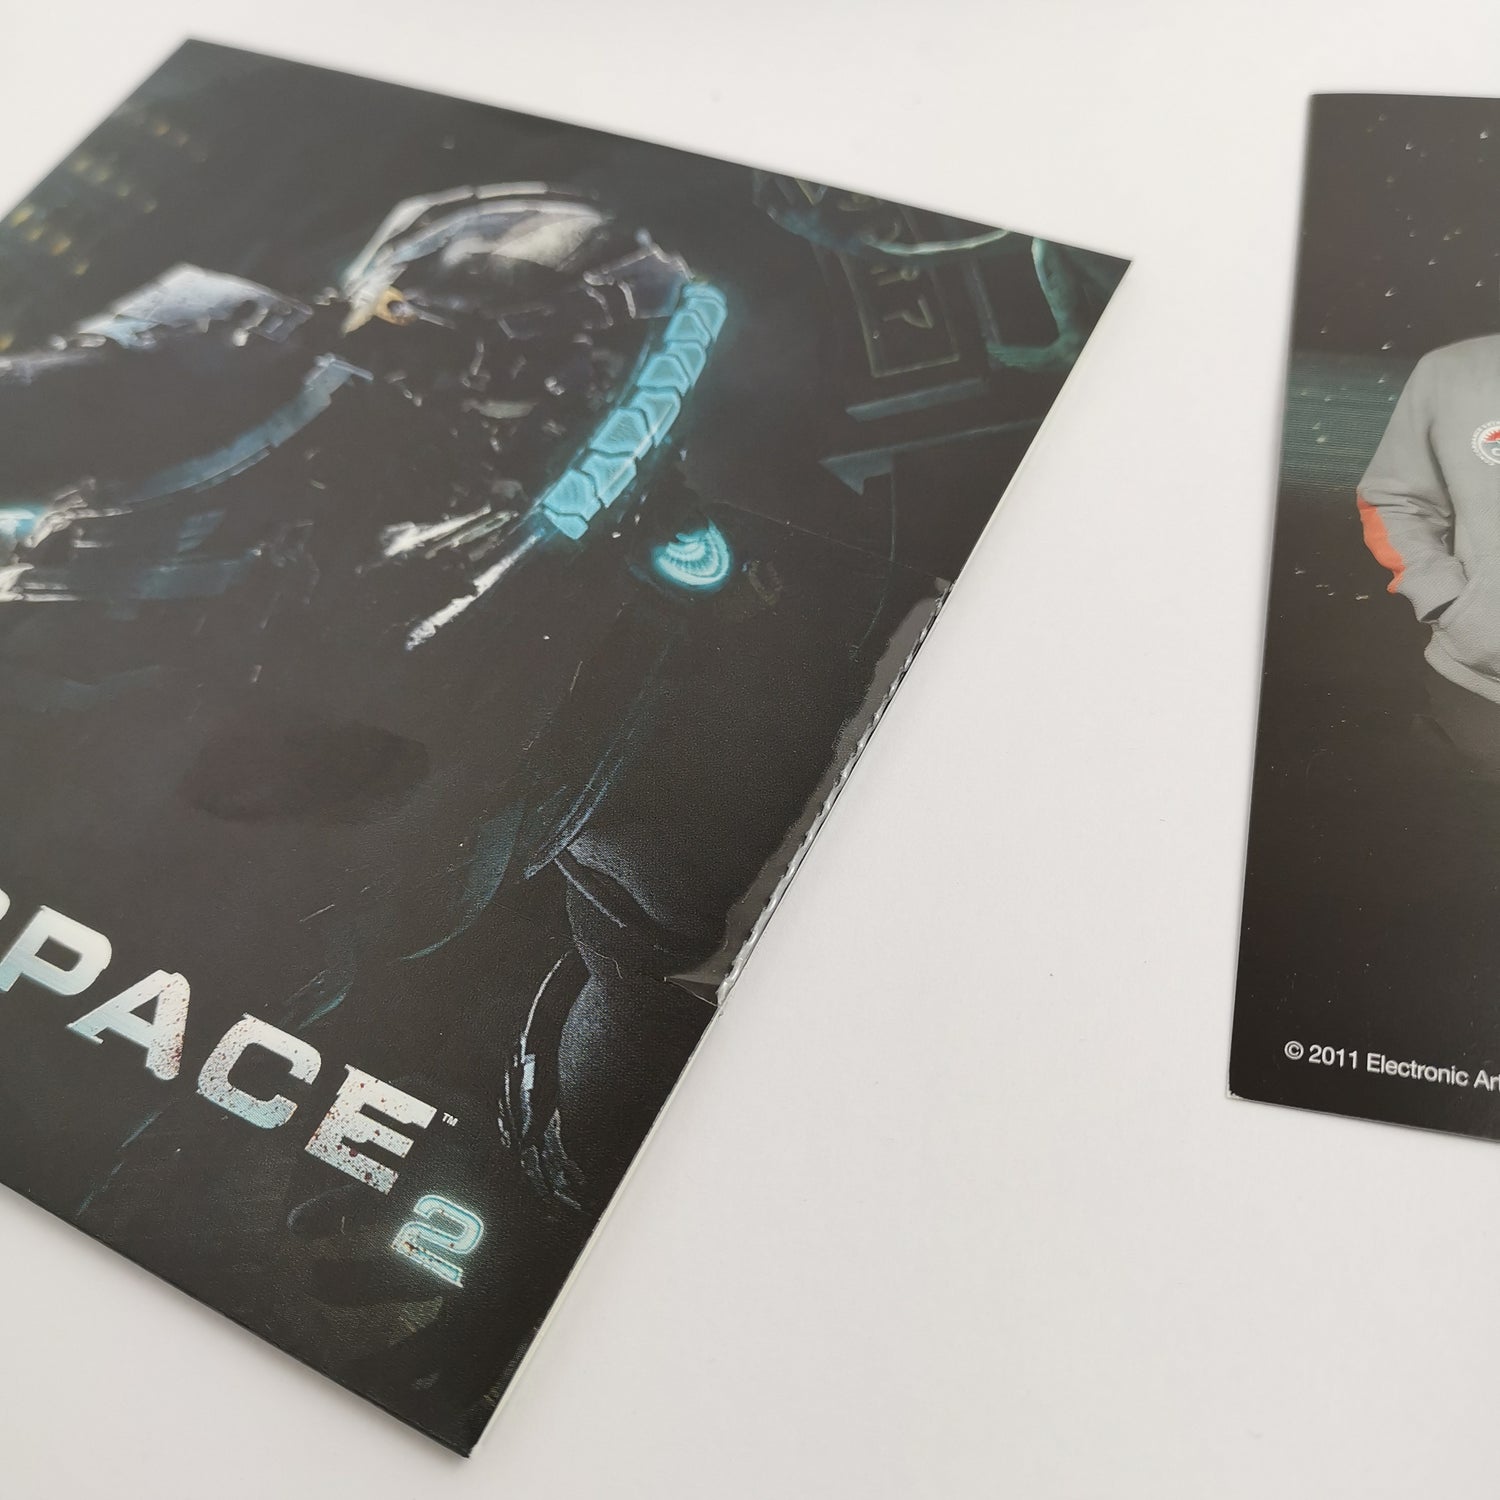 Sony Playstation 3 Game: Dead Space 2 Collectors Edition | PS3 - NTSC-U/C orig